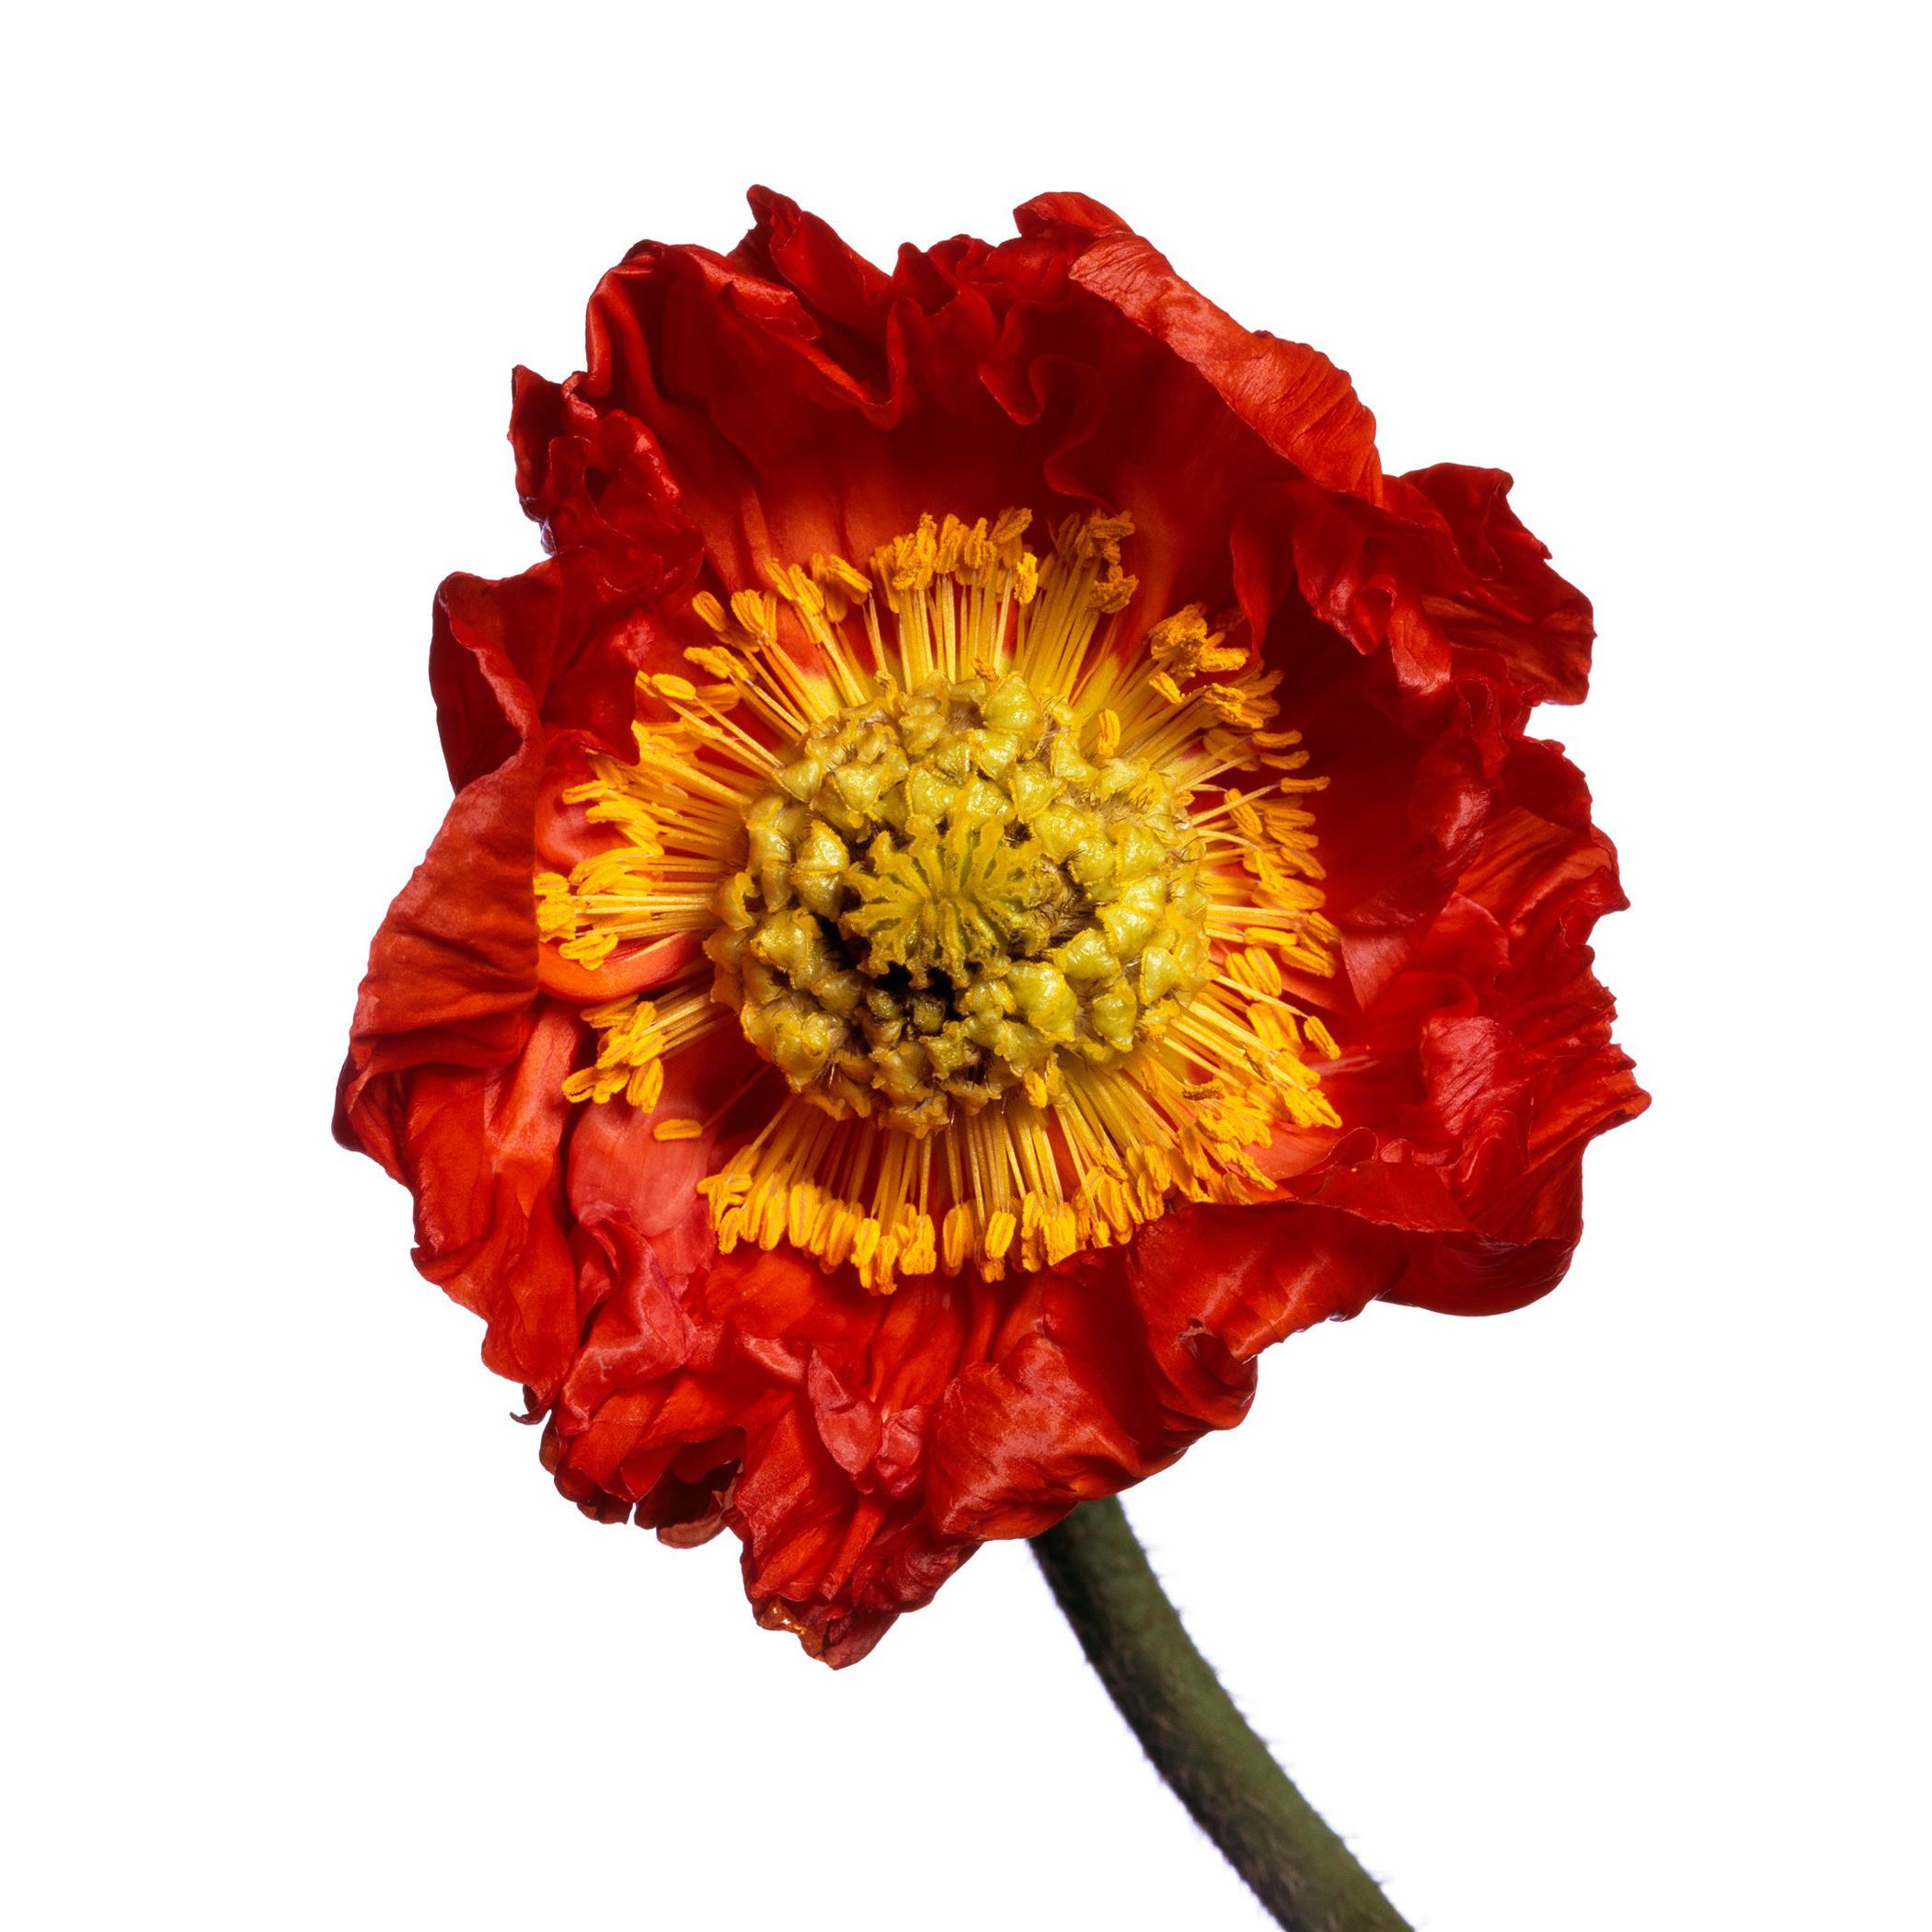 Iceland Poppy 'R' by Michael Zeppetello For Sale